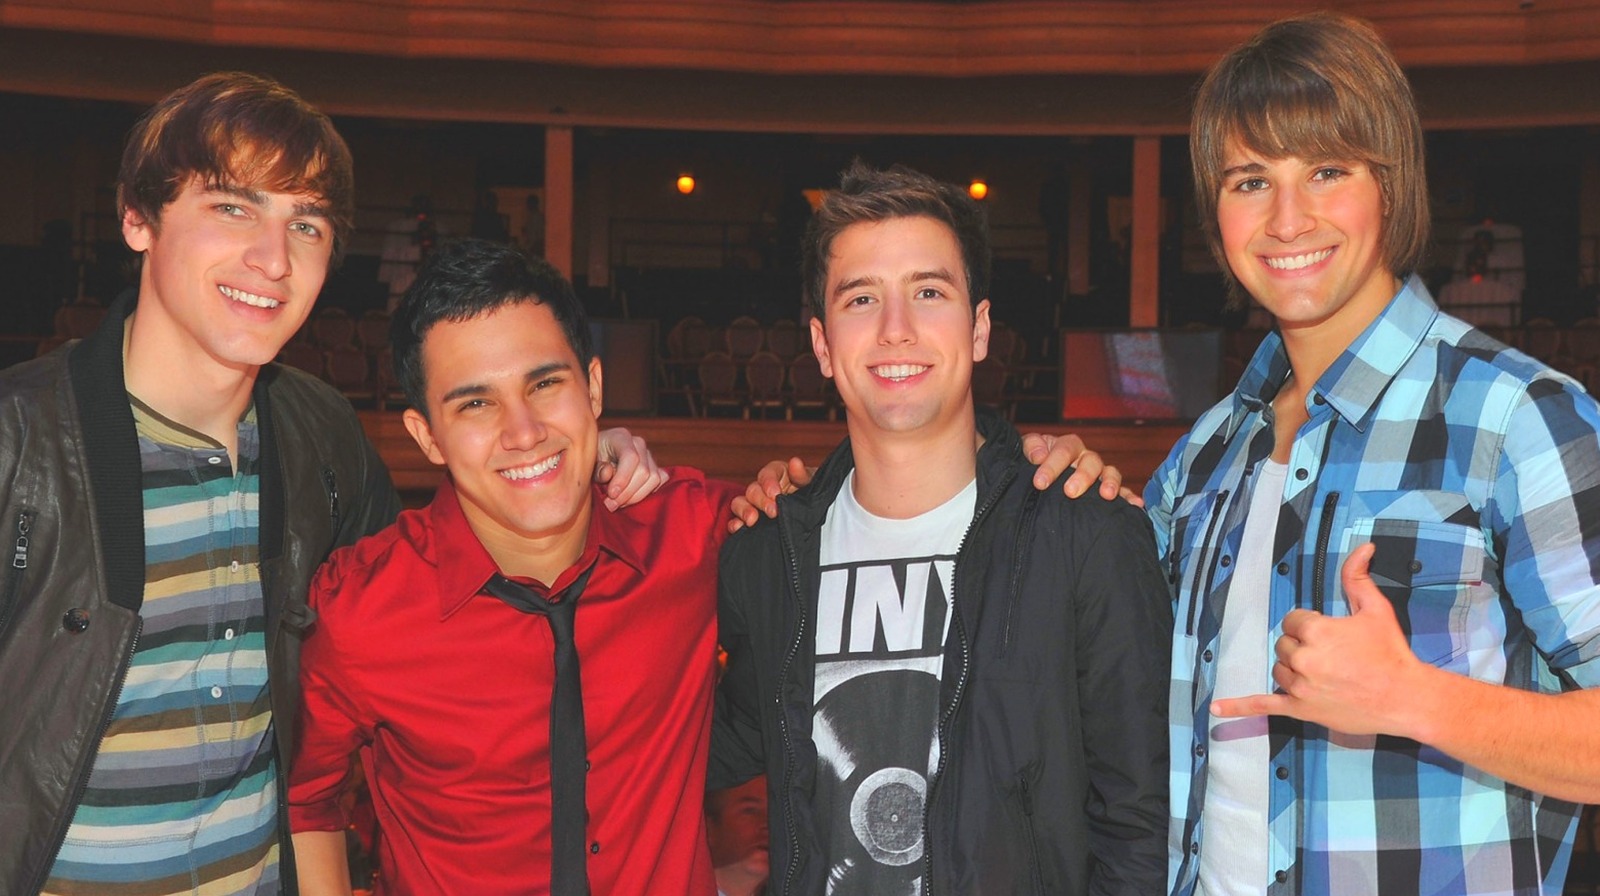 What The Cast Of Big Time Rush Looks Like Today - 247 News Around The World